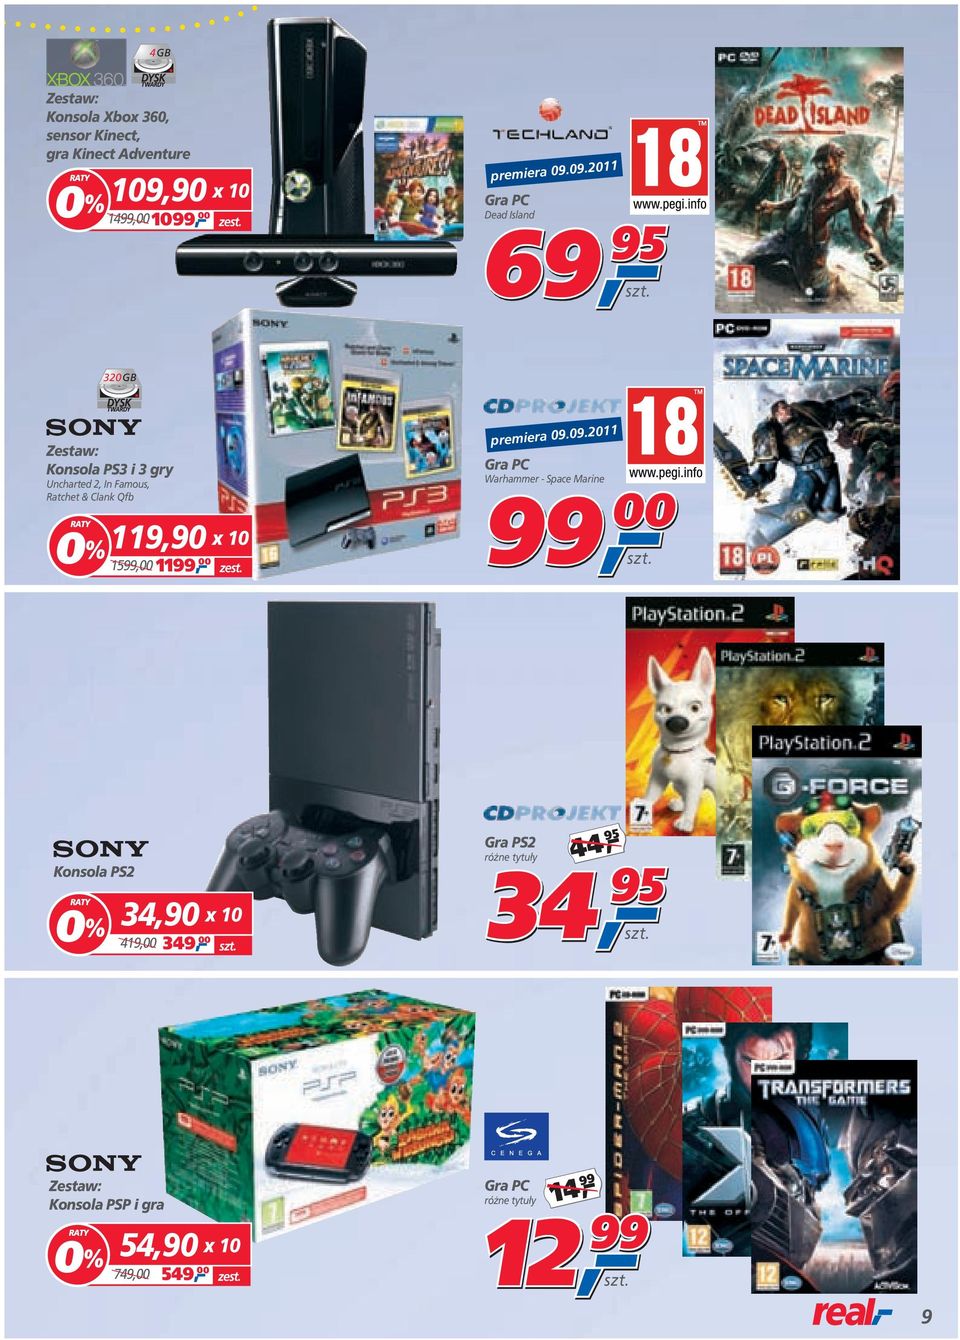 09.20 Gra PC Dead Island 69 320GB Zestaw: Konsola PS3 i 3 gry Uncharted 2, In Famous, Ratchet & Clank Qfb